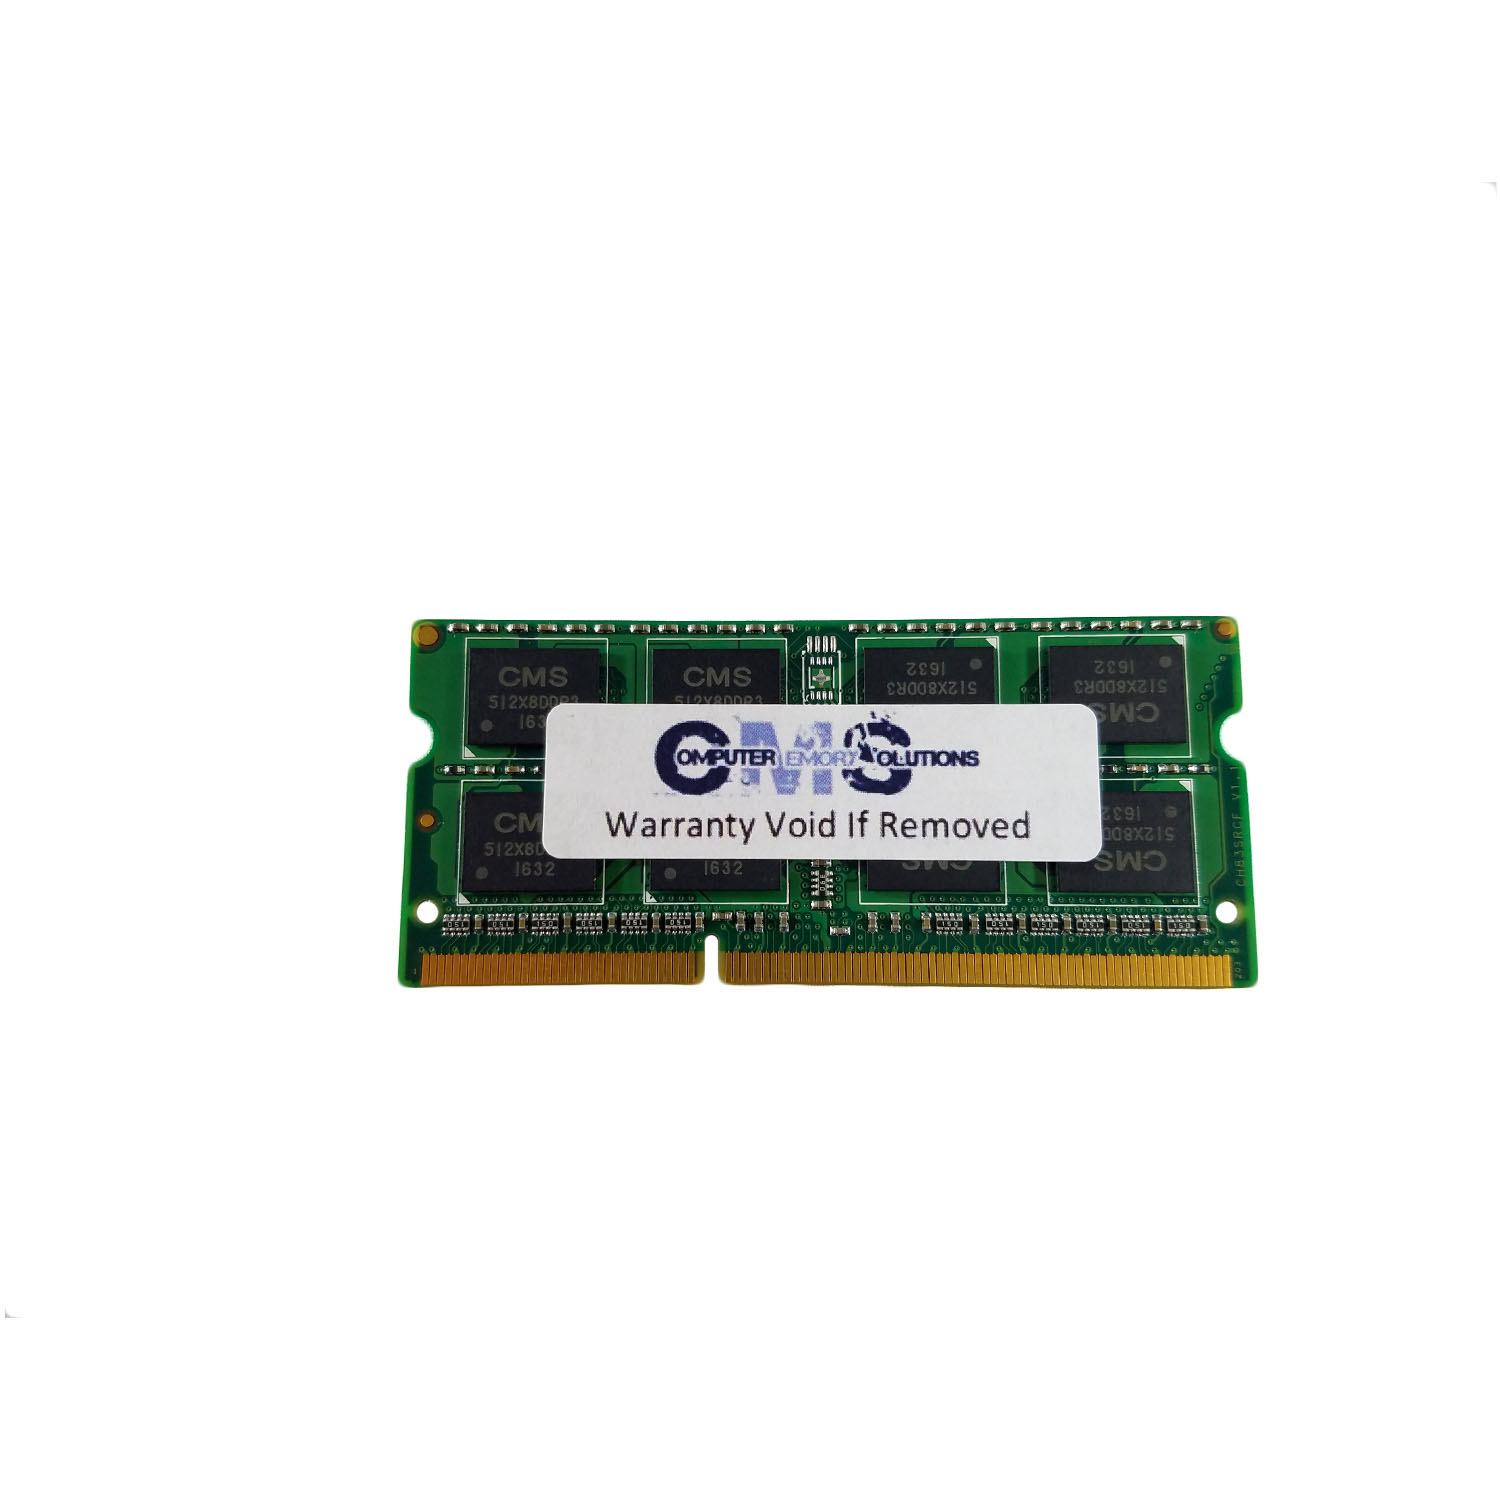 CMS 4GB (1X4GB) DDR3 12800 1600MHz NON ECC SODIMM Memory Ram Compatible with Dell Xps One 27 (2710) - A20 - image 1 of 3